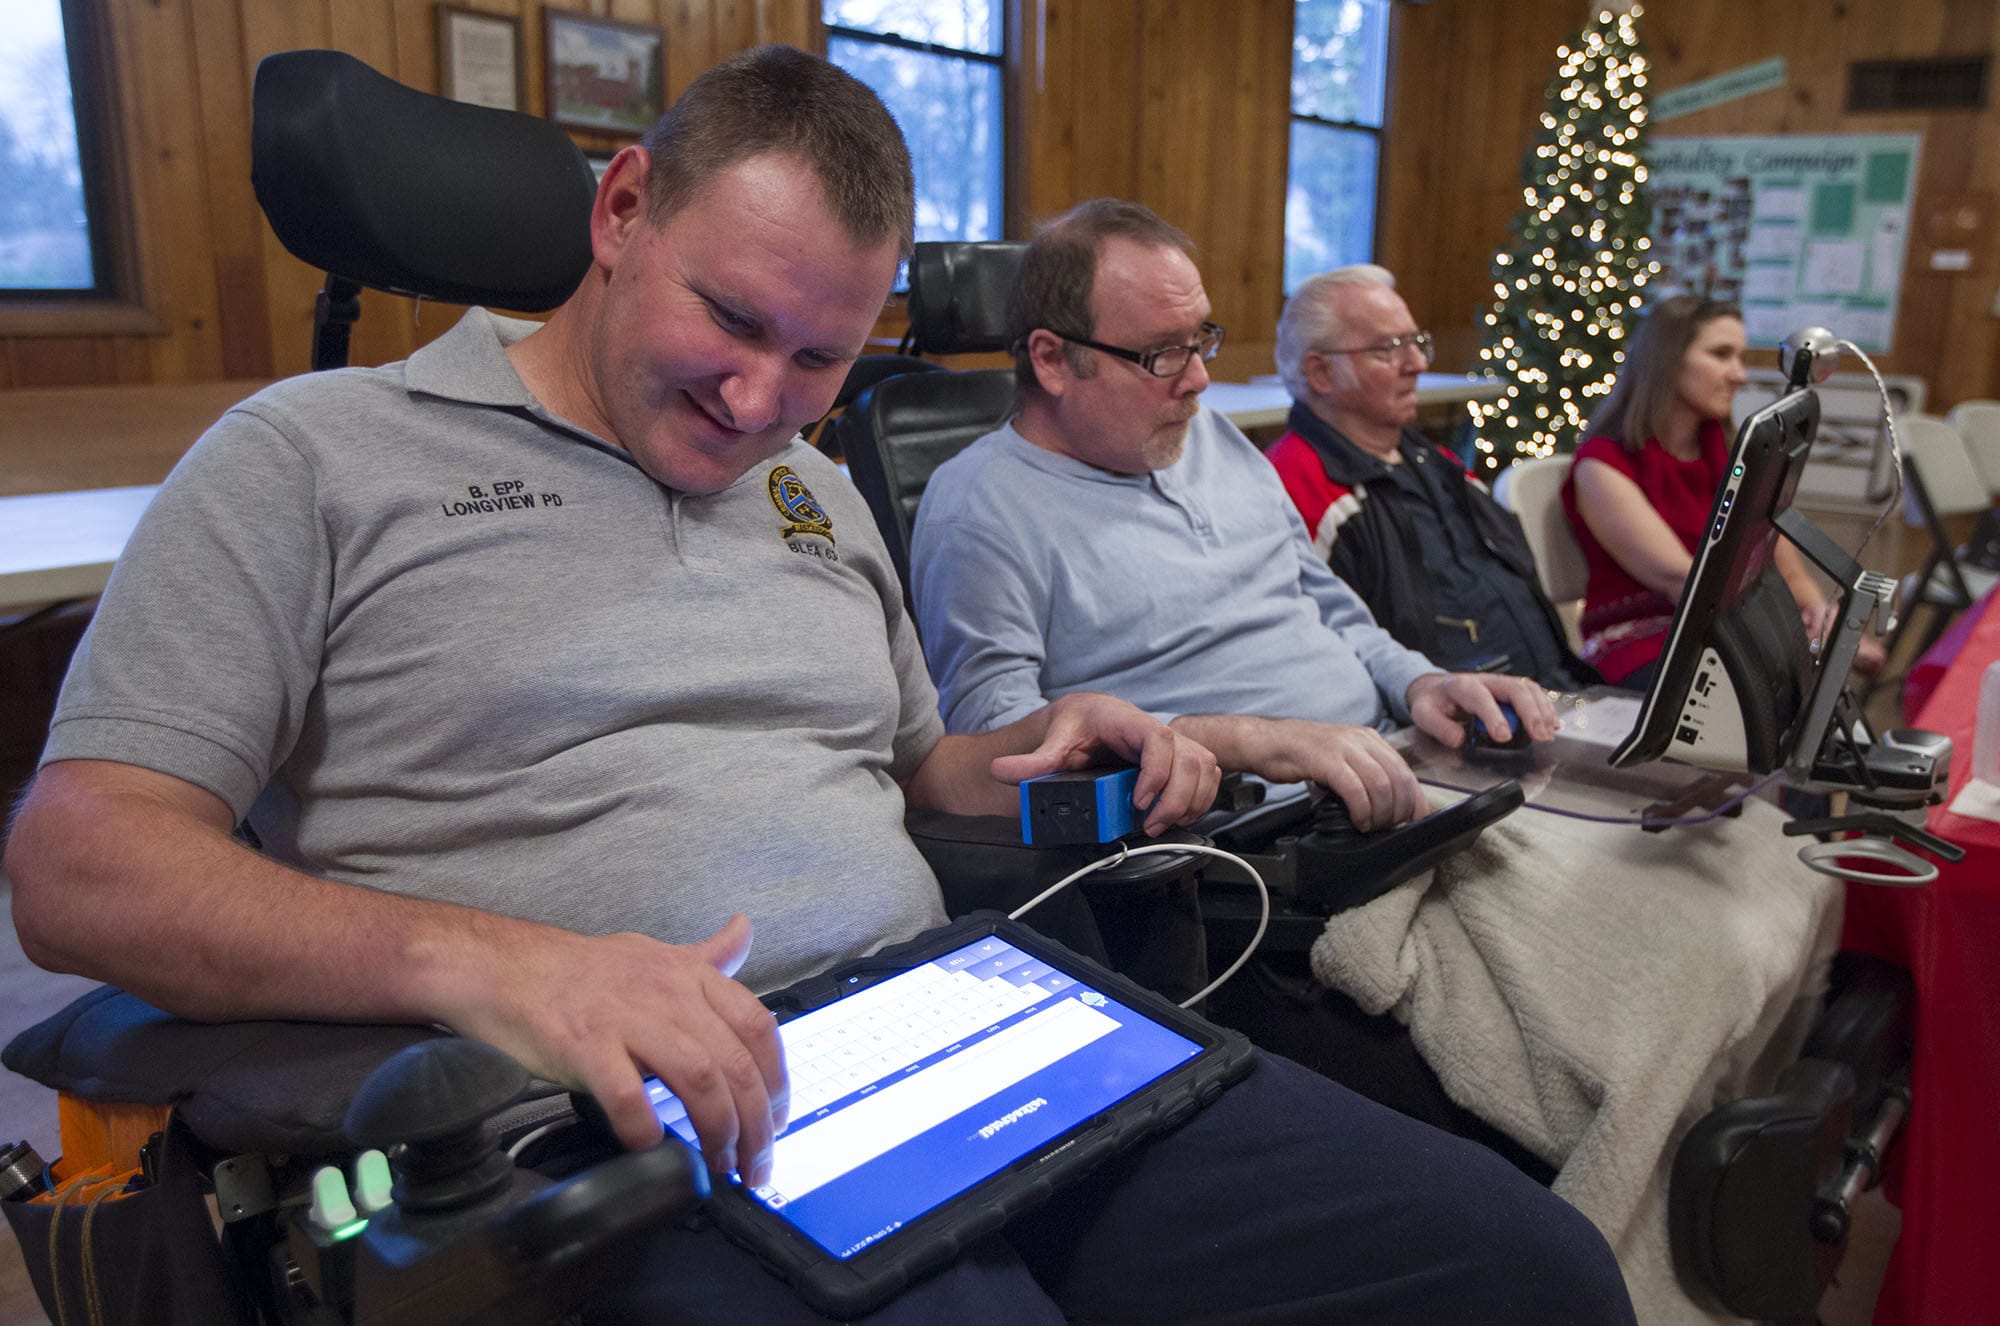 Brian Epp, left, uses a tablet to communicate with John Meyer of Camas at the regional ALS Association support group's Christmas potluck Wednesday at St. Luke's Episcopal Church in Vancouver.